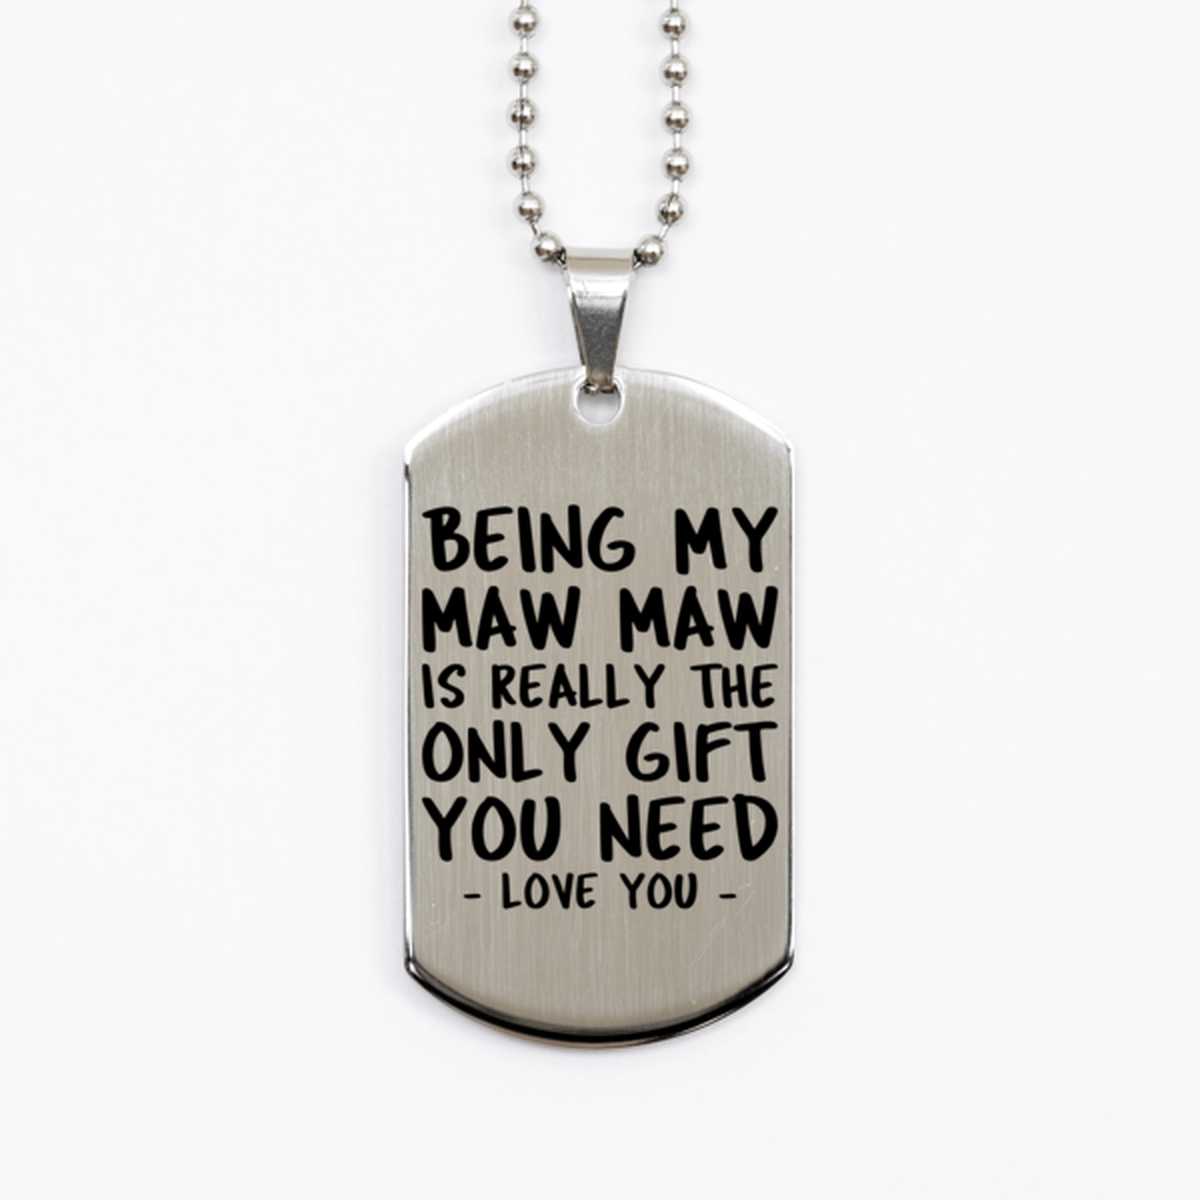 Funny Maw Maw Silver Dog Tag Necklace, Being My Maw Maw Is Really the Only Gift You Need, Best Birthday Gifts for Maw Maw